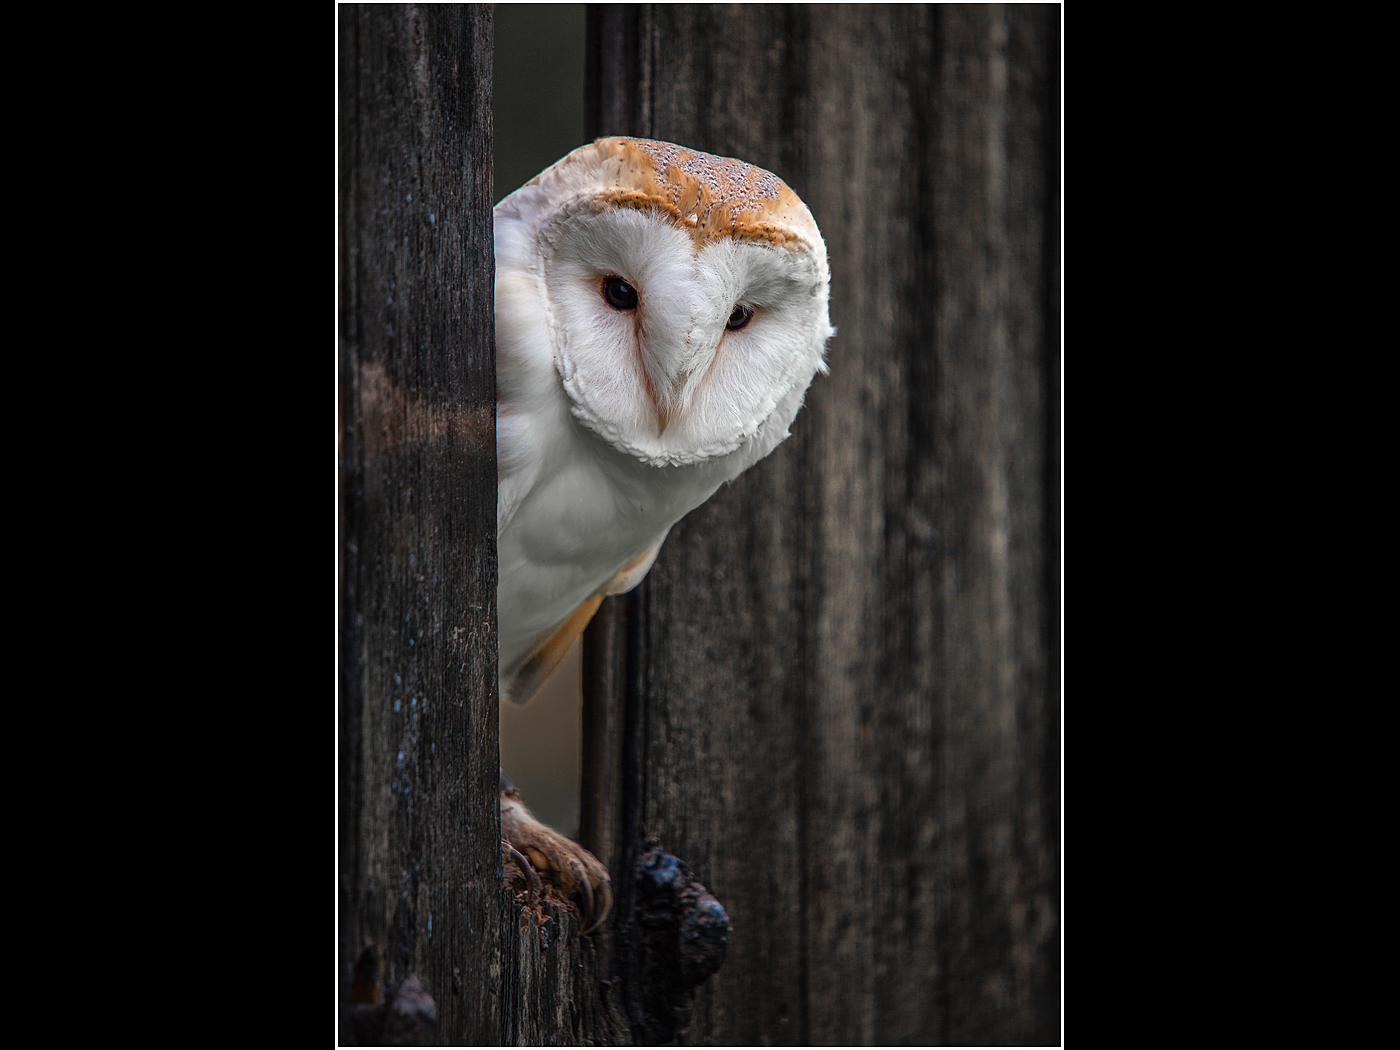 Barn Owl Peeping out of the Barn